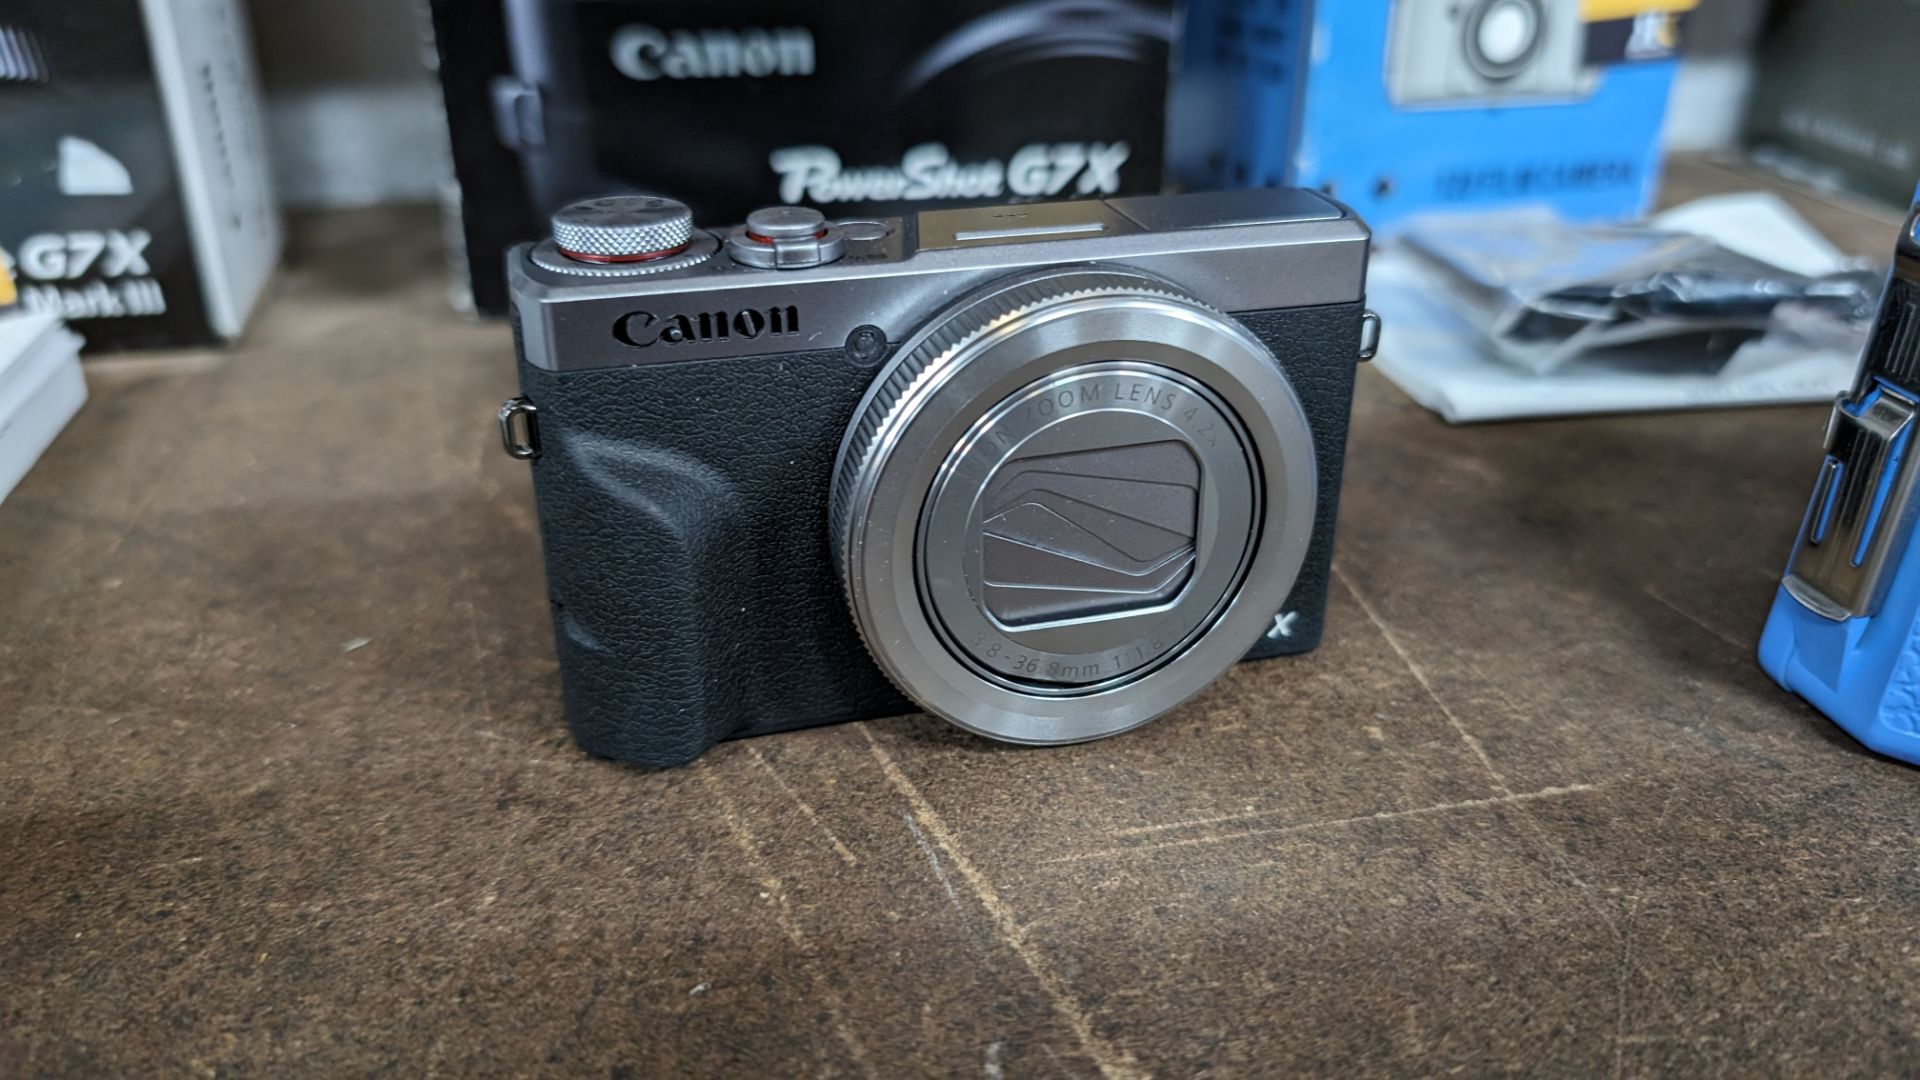 Canon PowerShot G7X Mark II camera, including battery and charger - Image 3 of 12